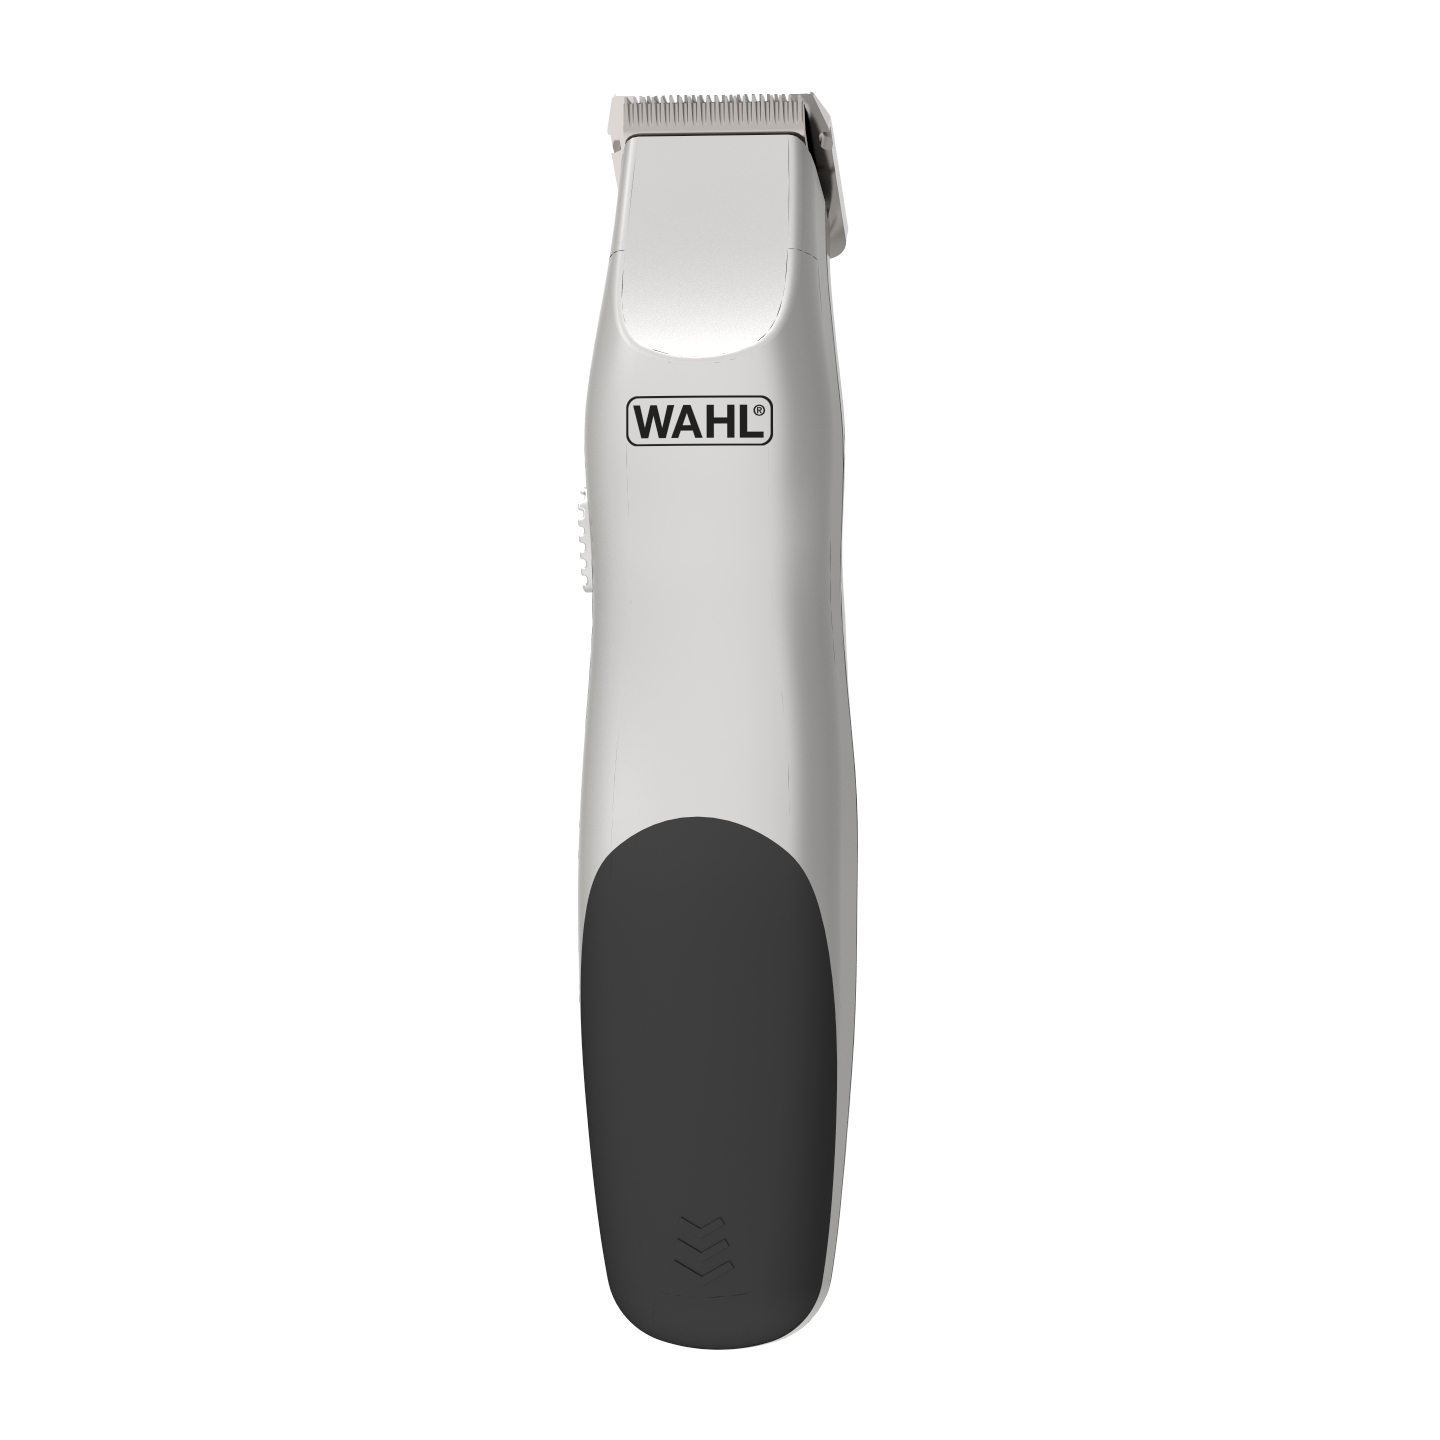 wahl ct12 5gg